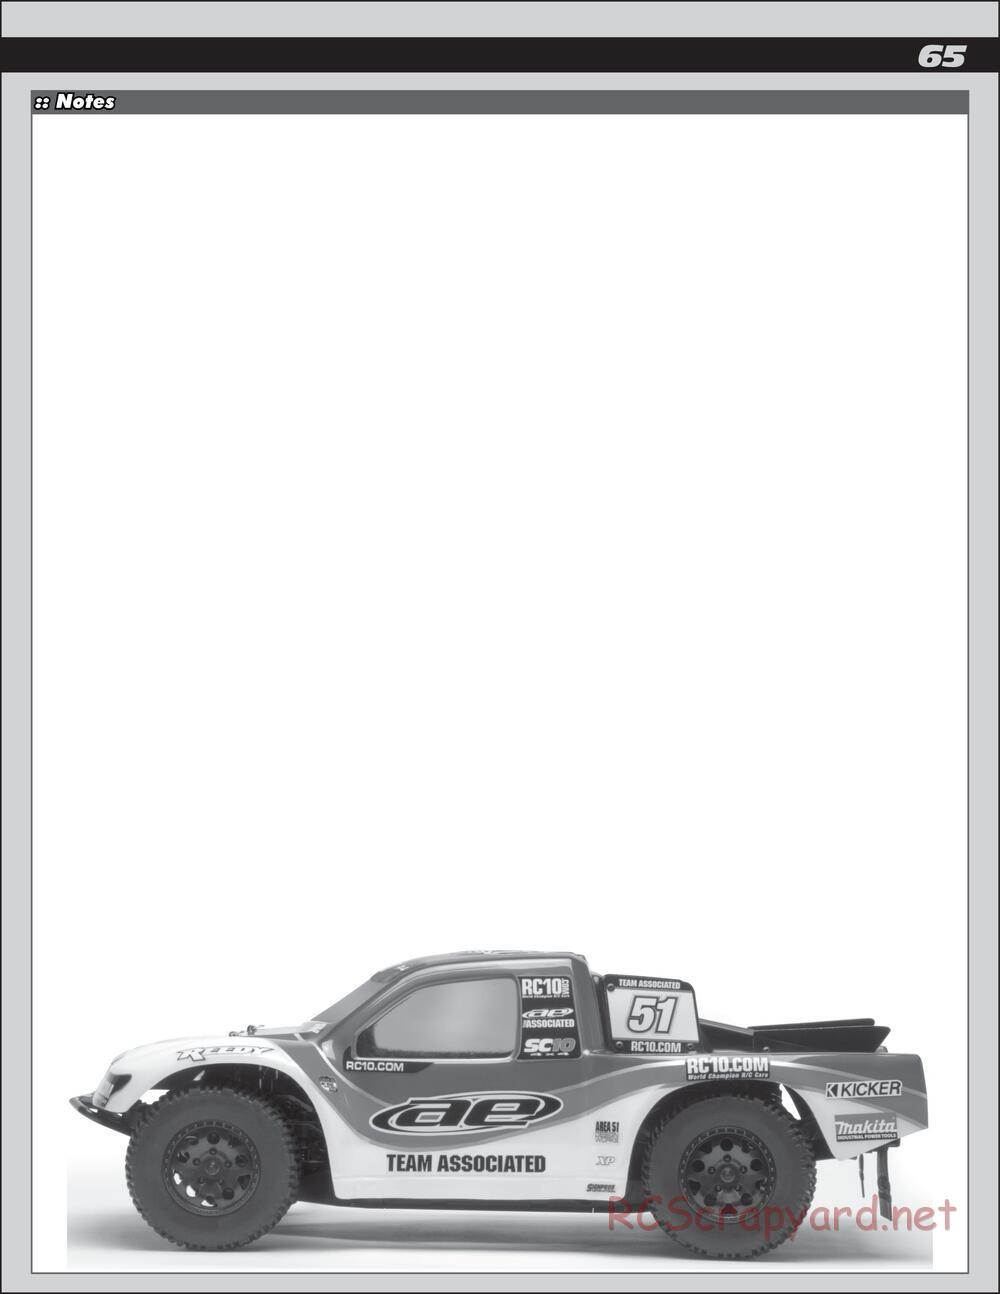 Team Associated - SC10 4x4 Factory Team - Manual - Page 65